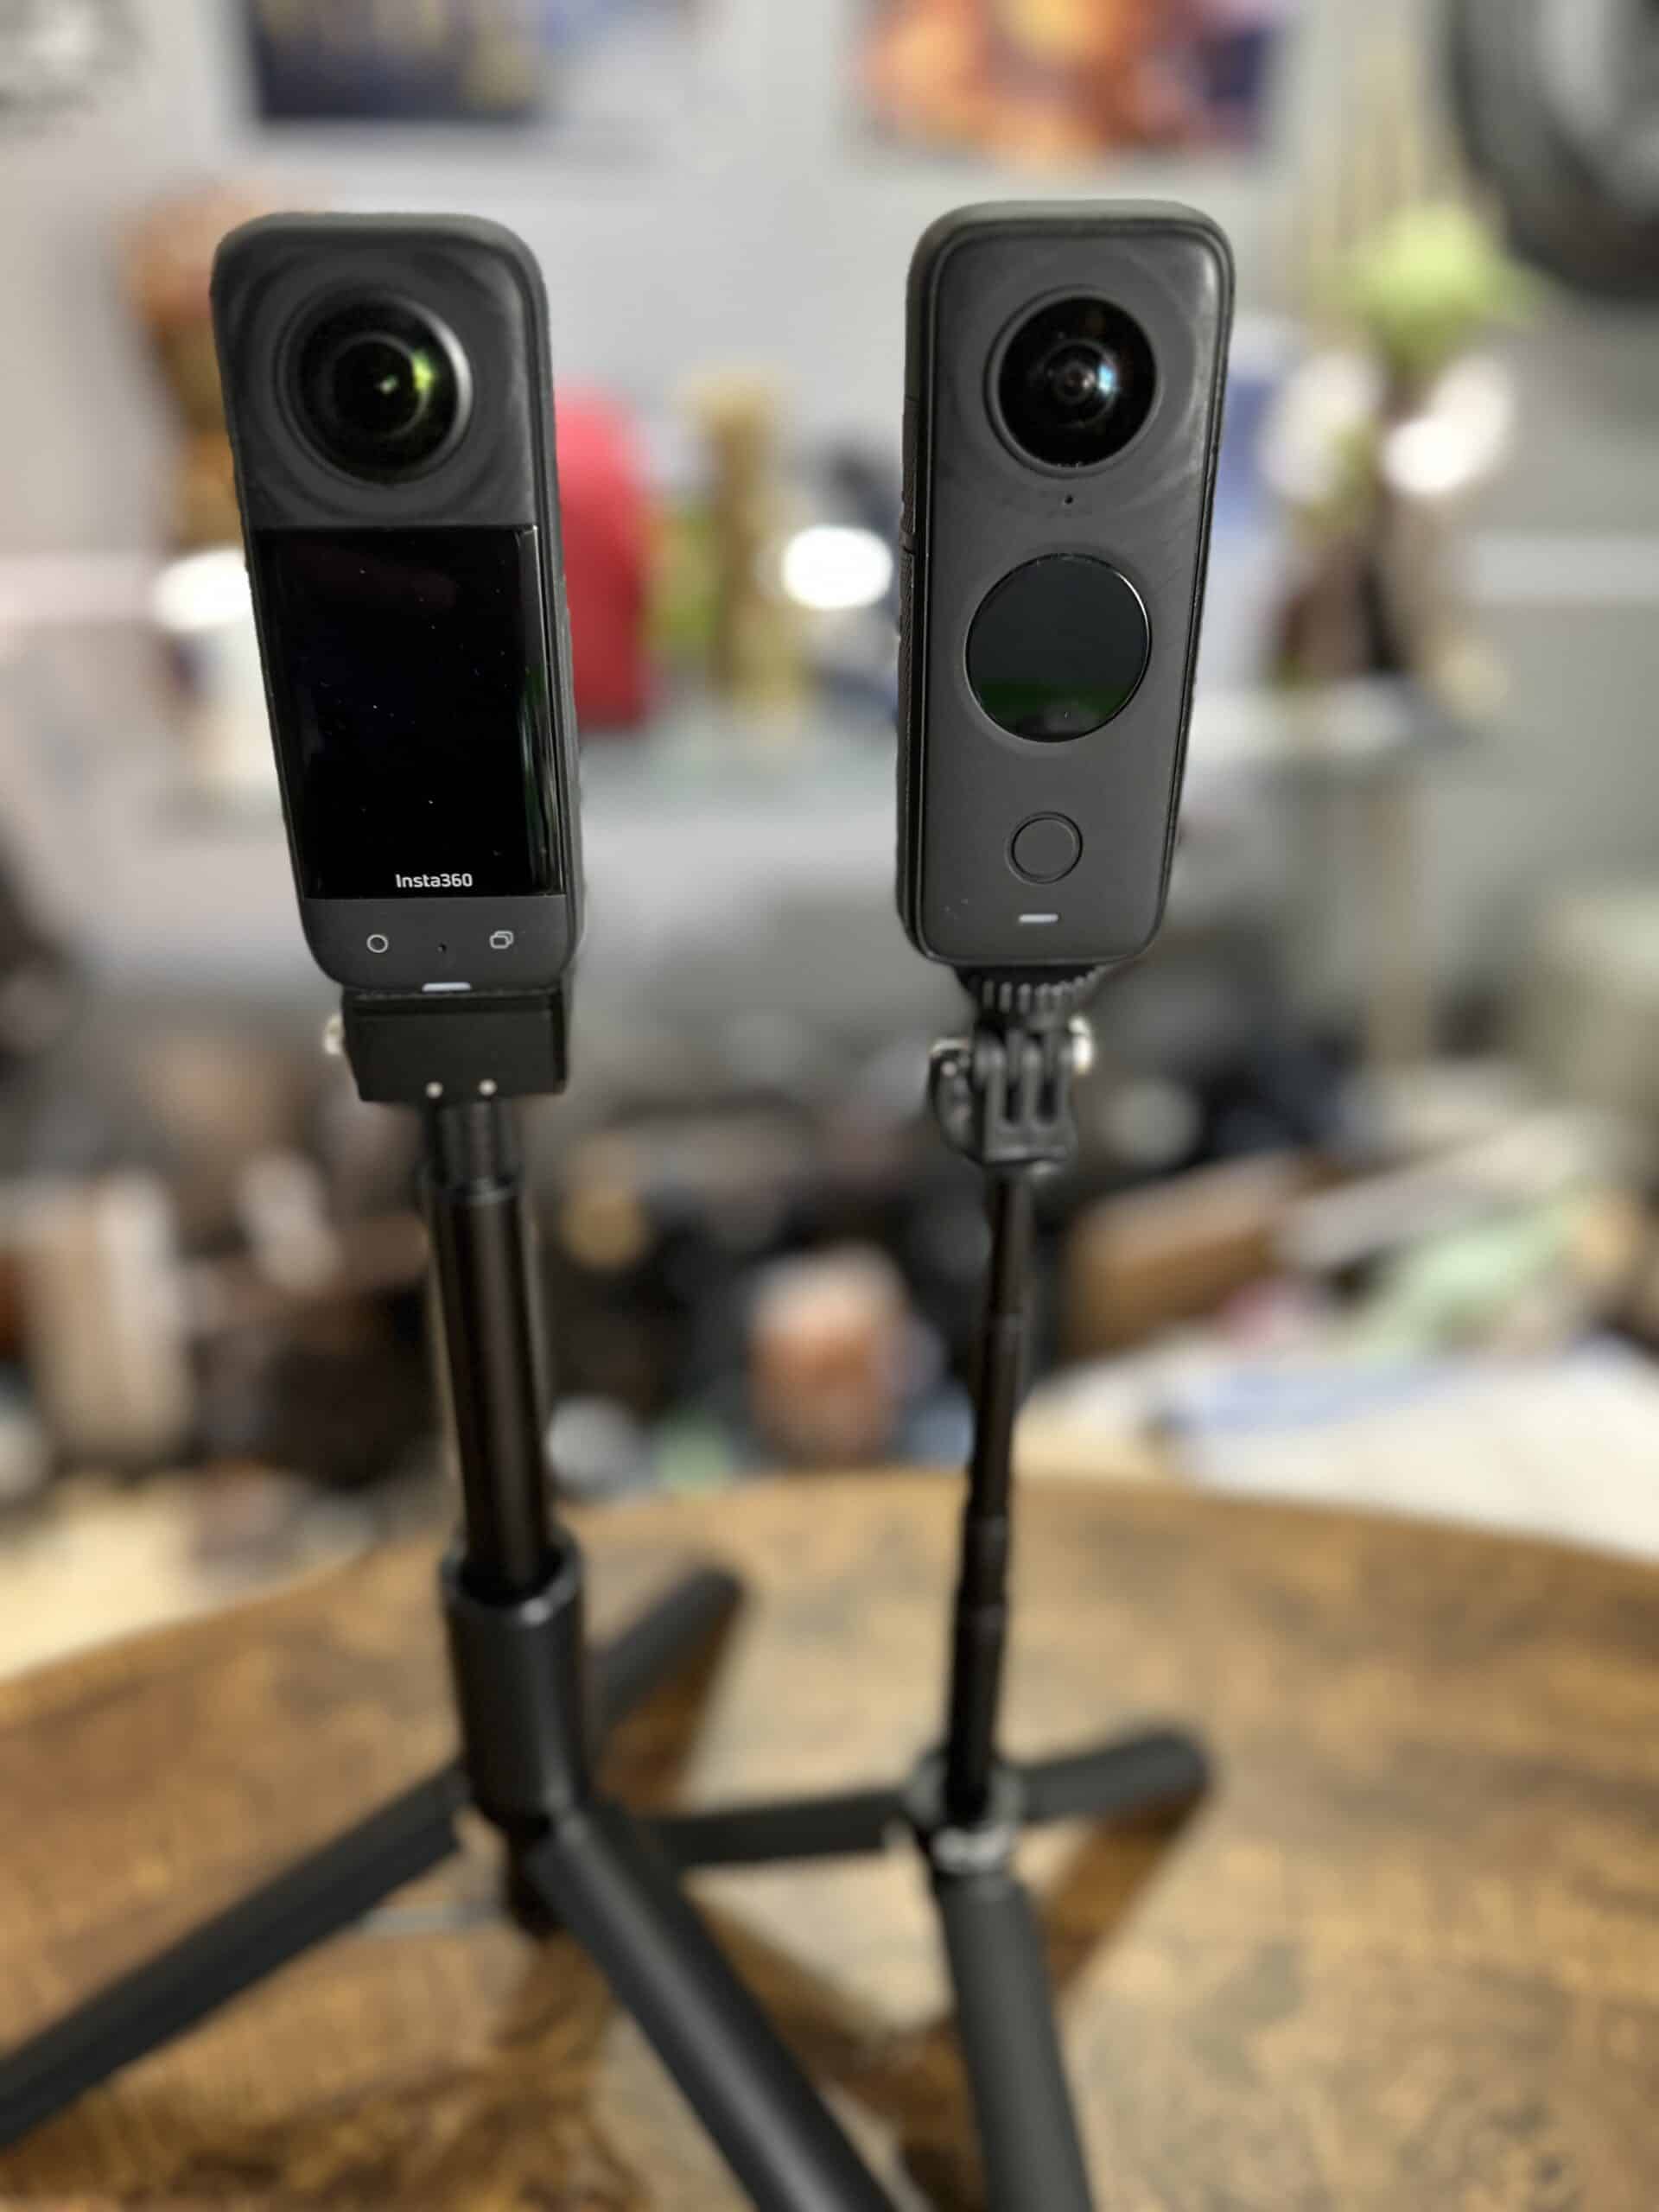 insta360 x2 and x3 360 cameras on invisible selfie sticks and tripods. used to shoot 360 monoscopic VR videos.